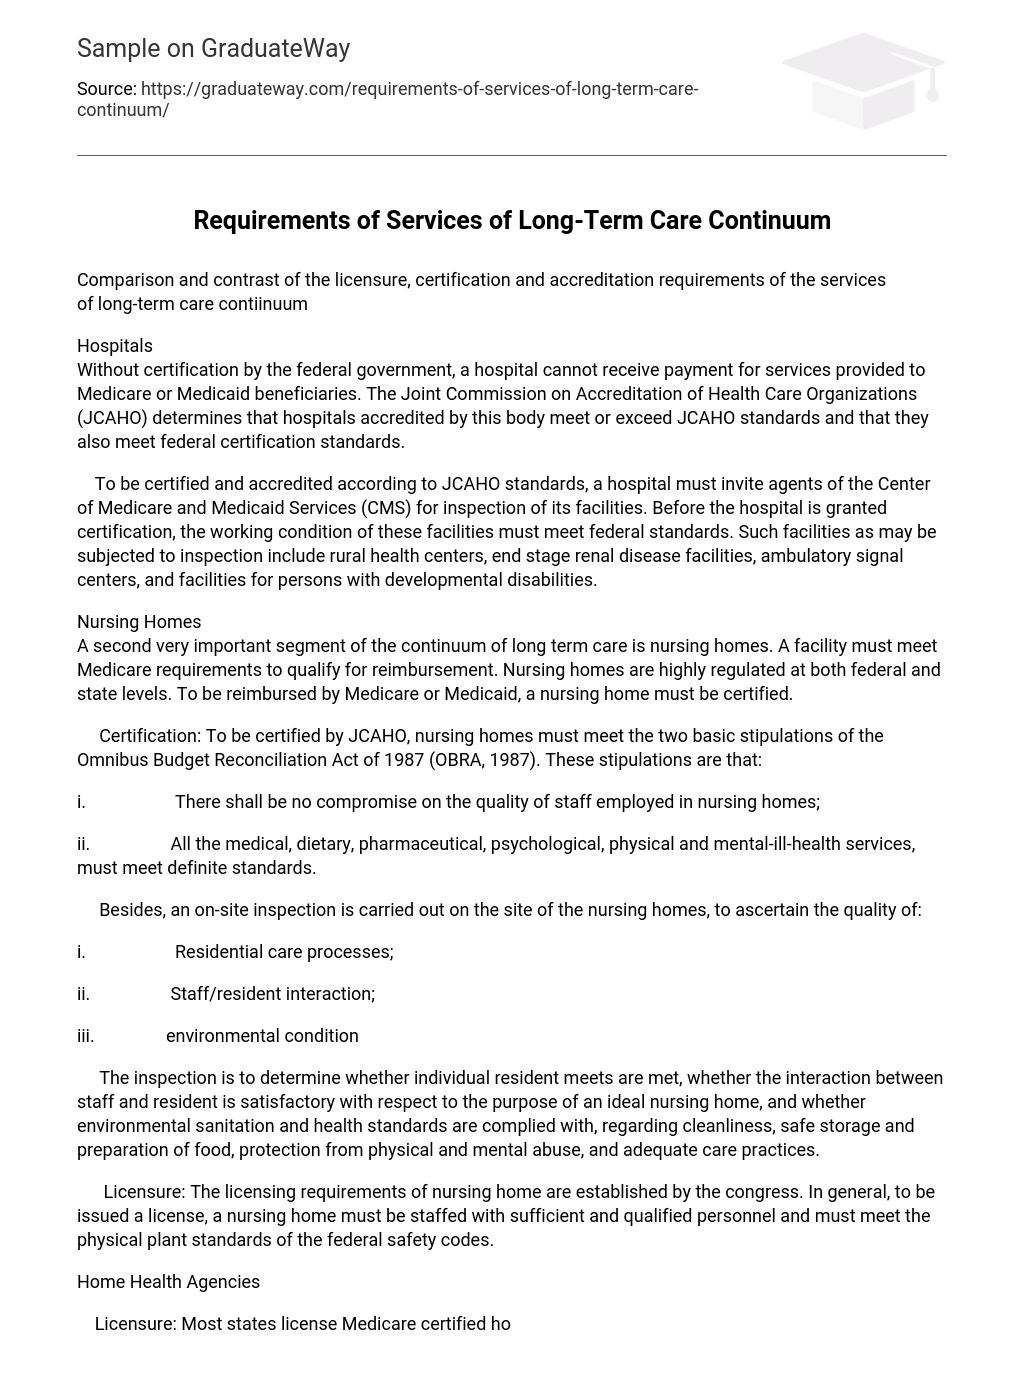 Requirements of Services of Long-Term Care Continuum